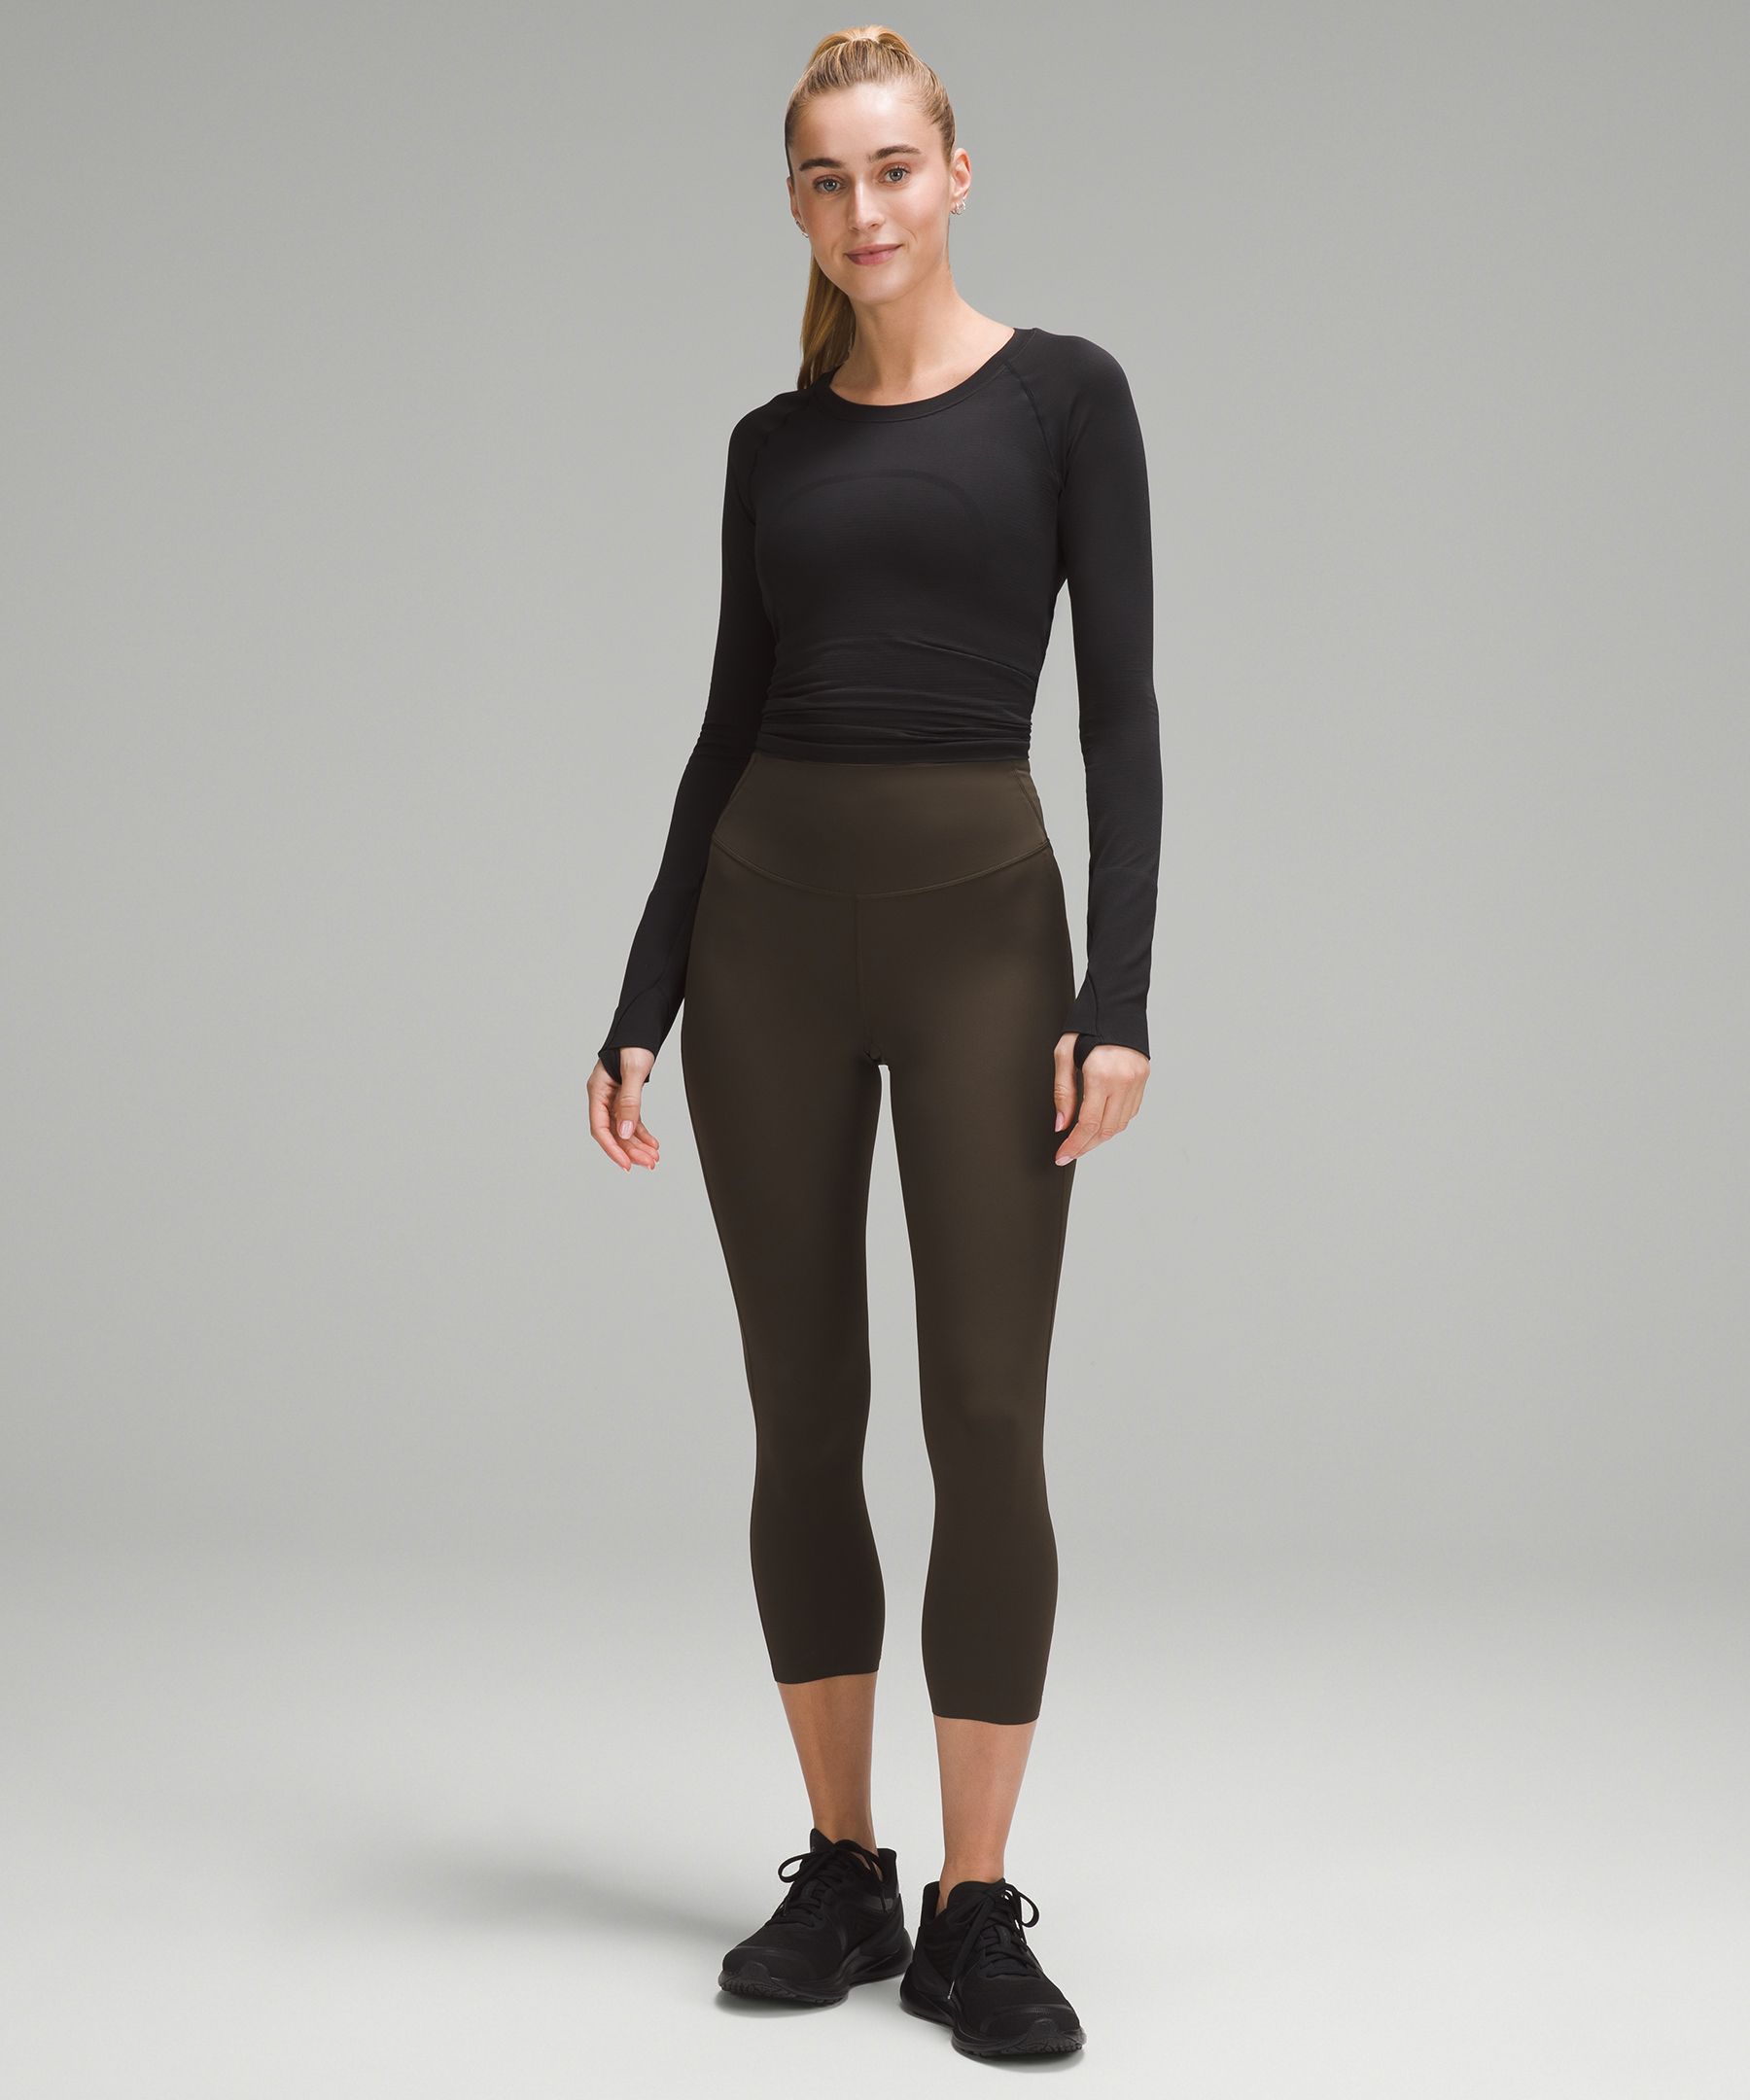 A try on of the new Base Pace HR 23 leggings in Symphony Blue